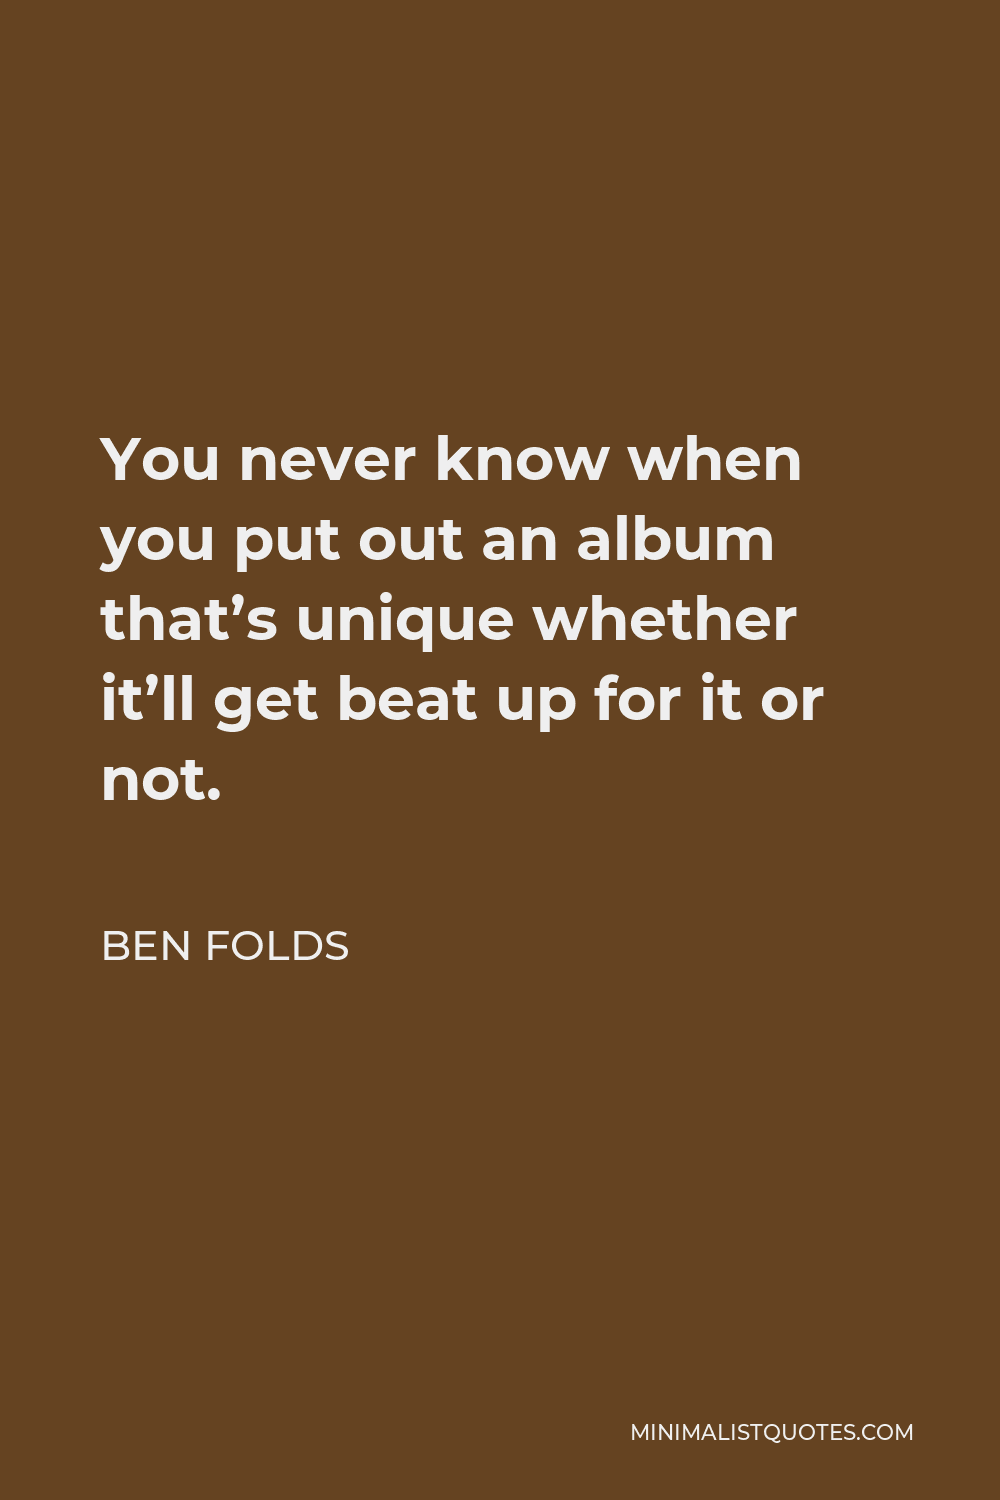 Ben Folds Quote - You never know when you put out an album that’s unique whether it’ll get beat up for it or not.